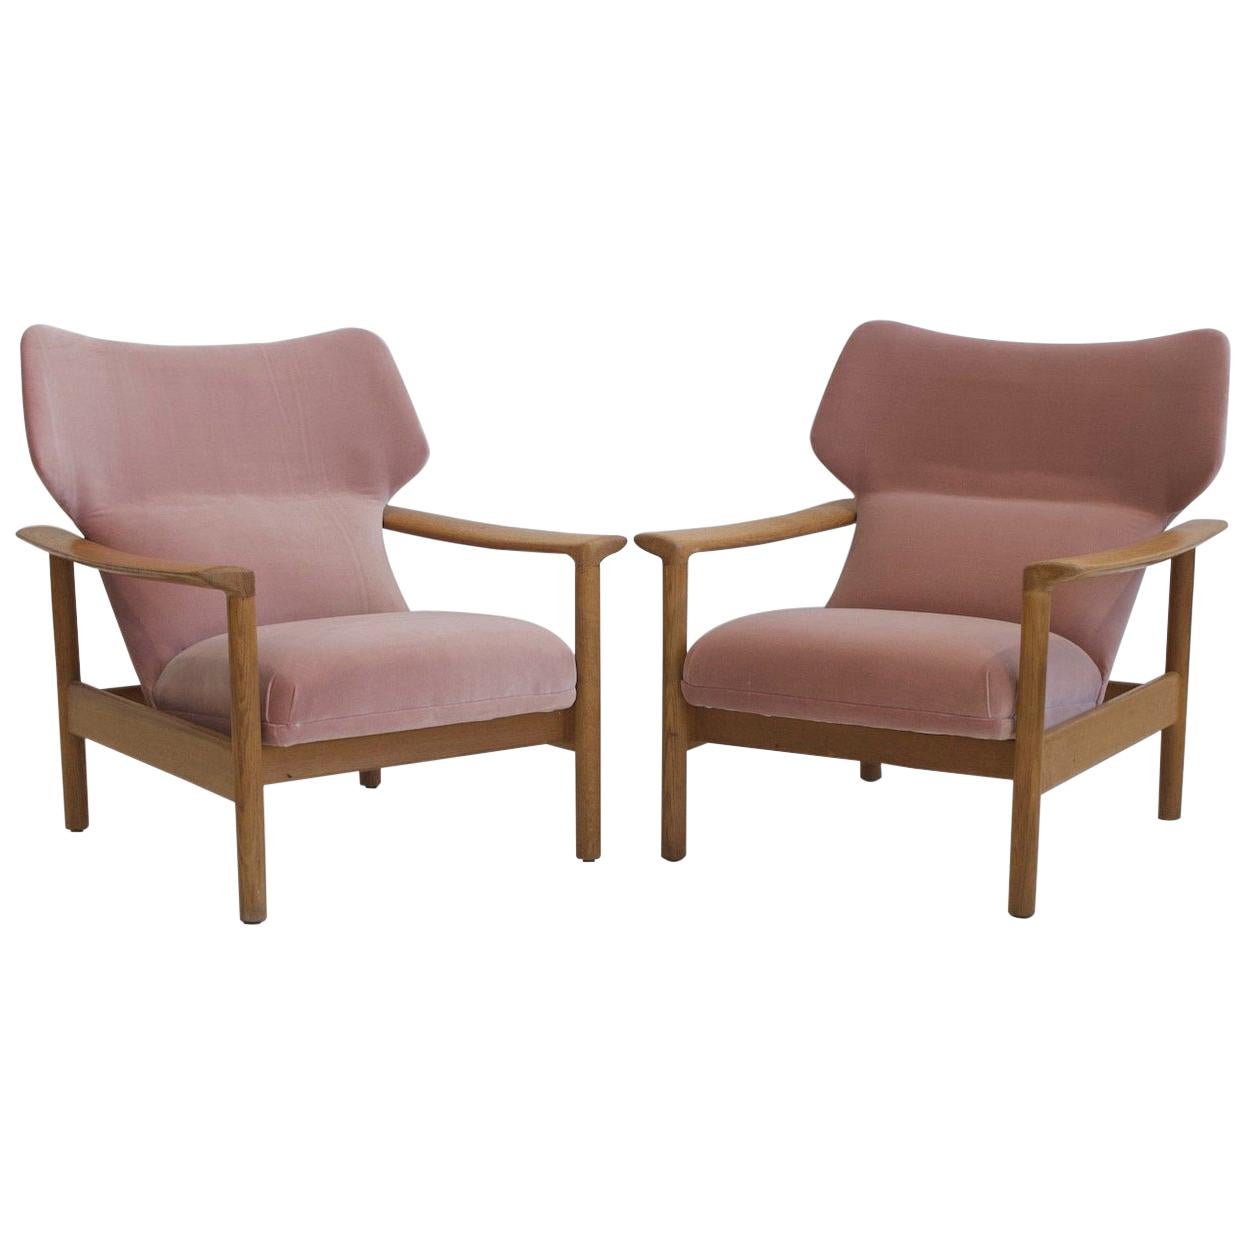 Pair of Pink Velvet Armchairs with Oak Frame